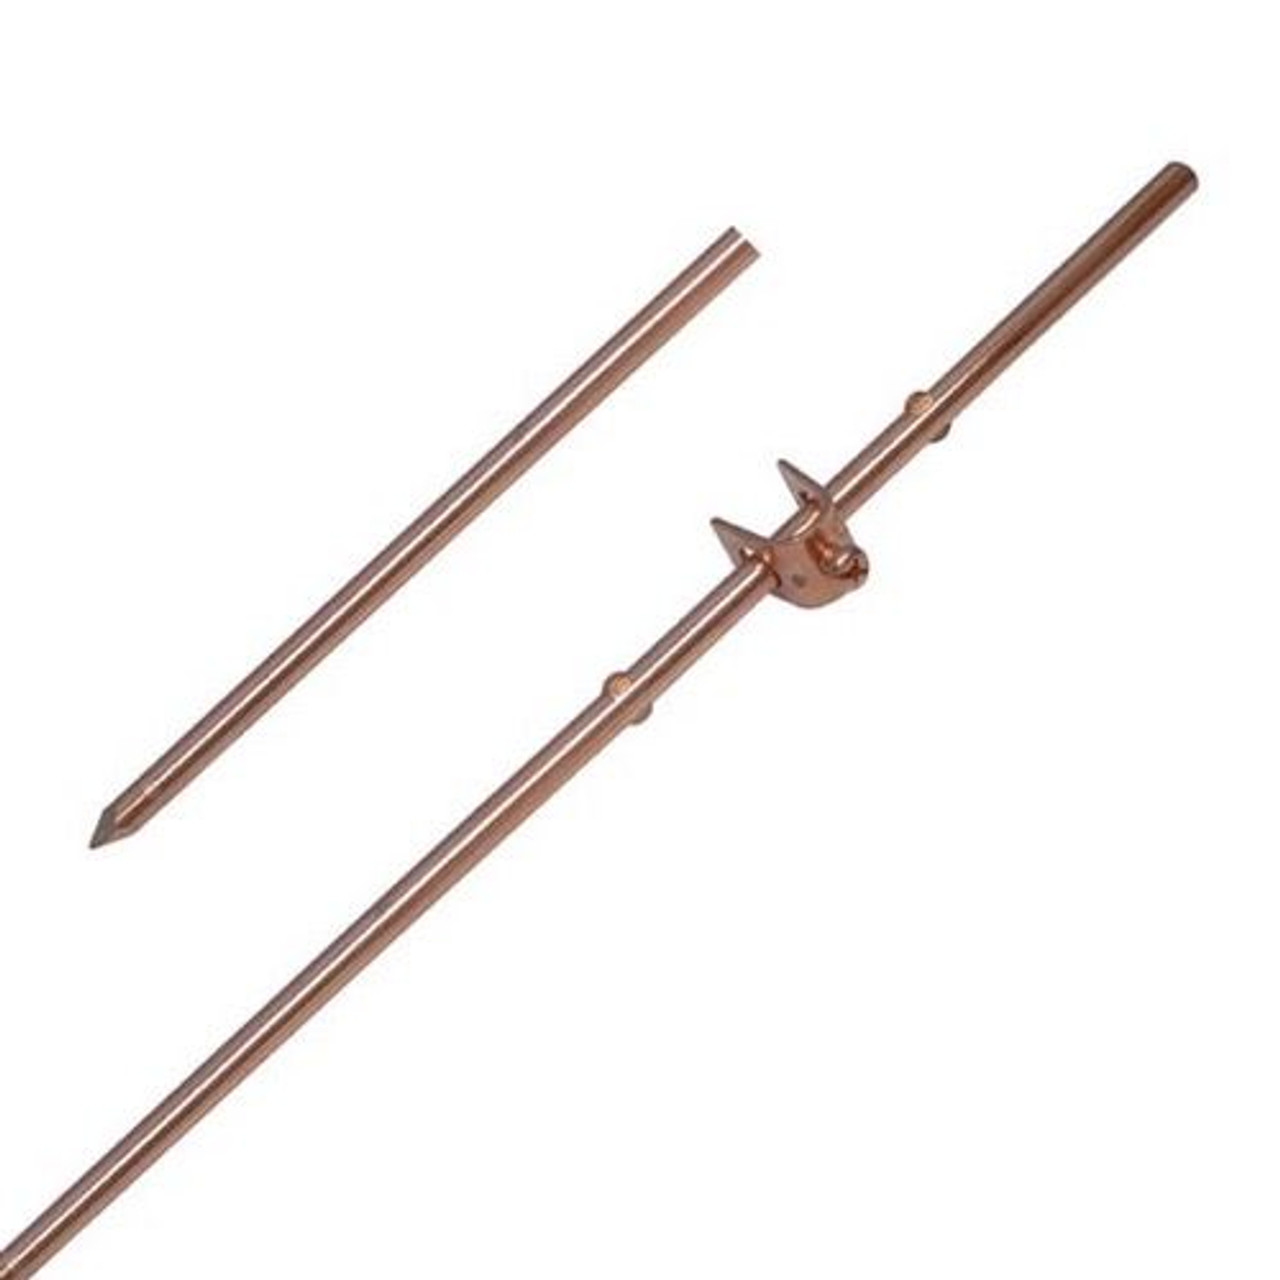 Philips VH129N Antenna Ground Rod 3/8" Inch by 4' FT Ground Rod Bonded DIRECTV Approved Copper Grounding Rod 4 Foot Antenna Electrode Satellite Dish TV Aerial Electrical Wire Ground / Lighting Rod with Clamp